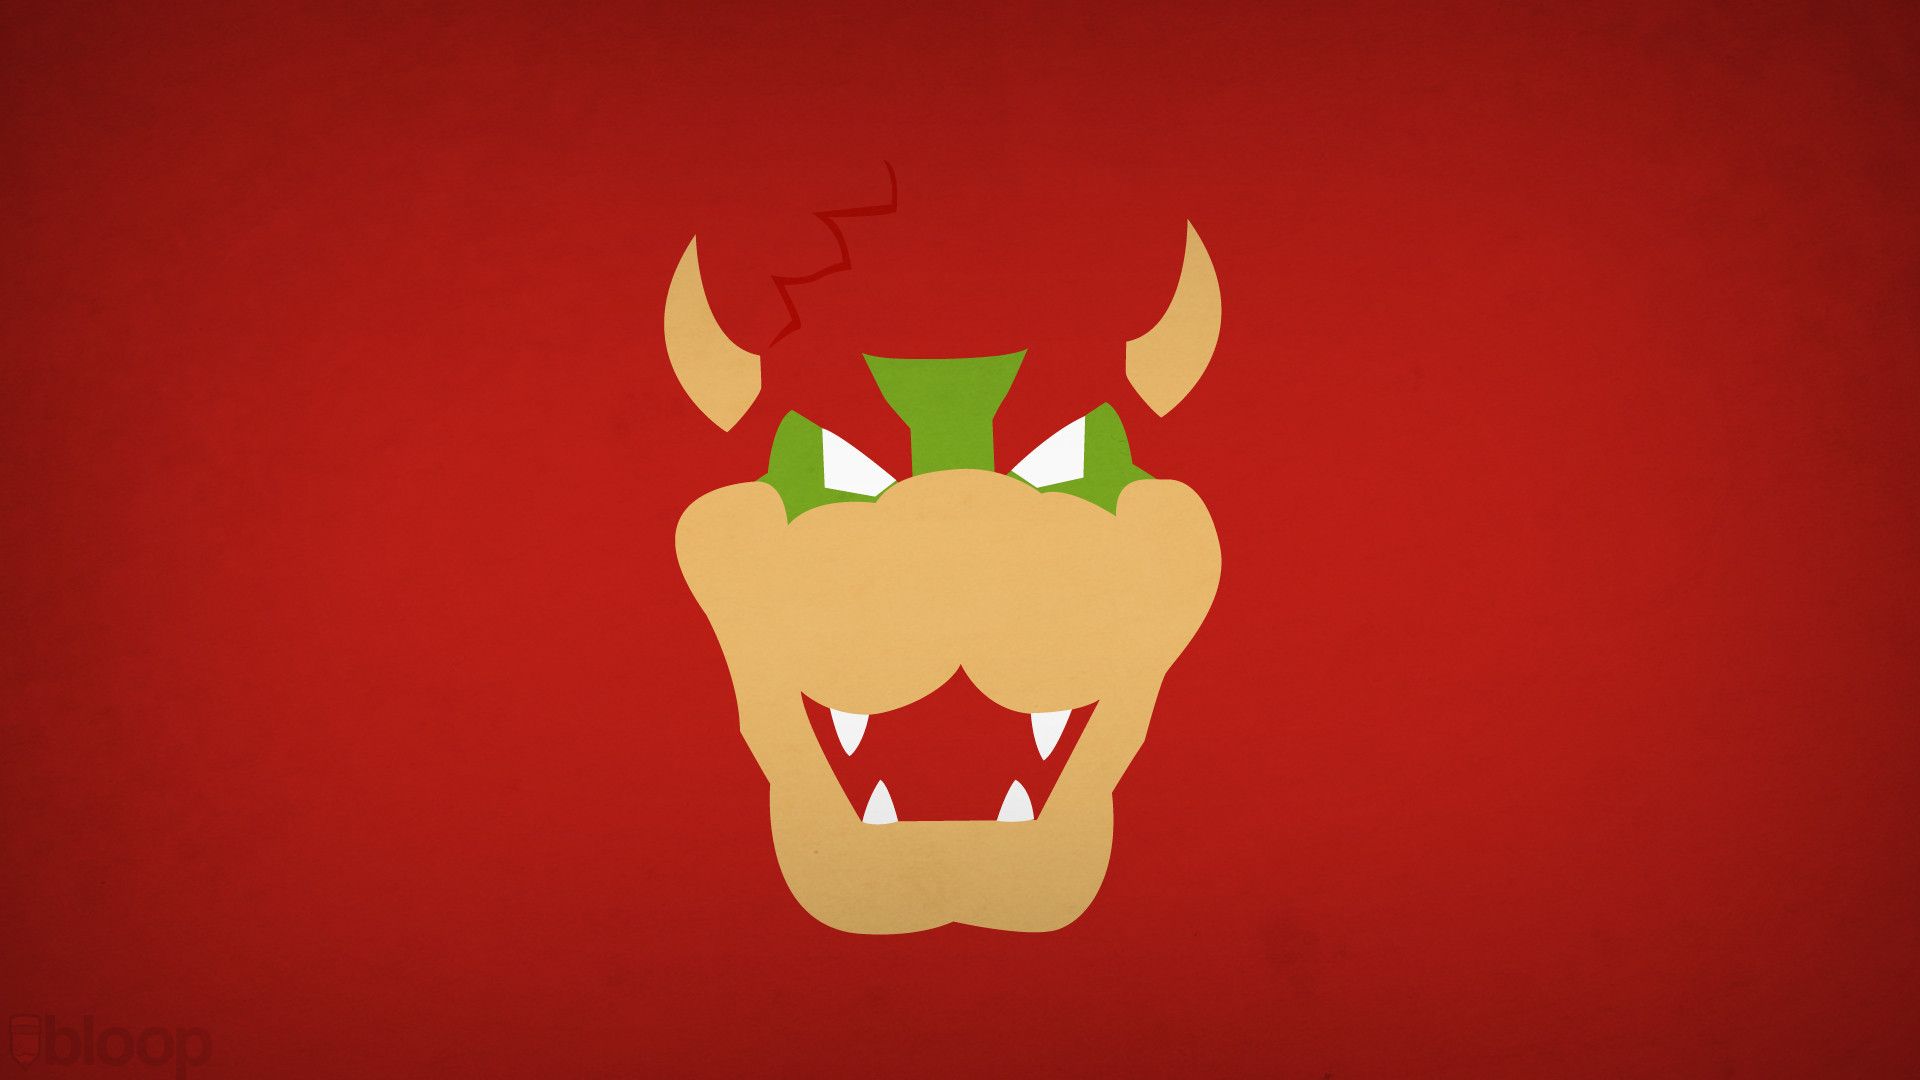 A close up of the face and mouth on an orange background - Bowser